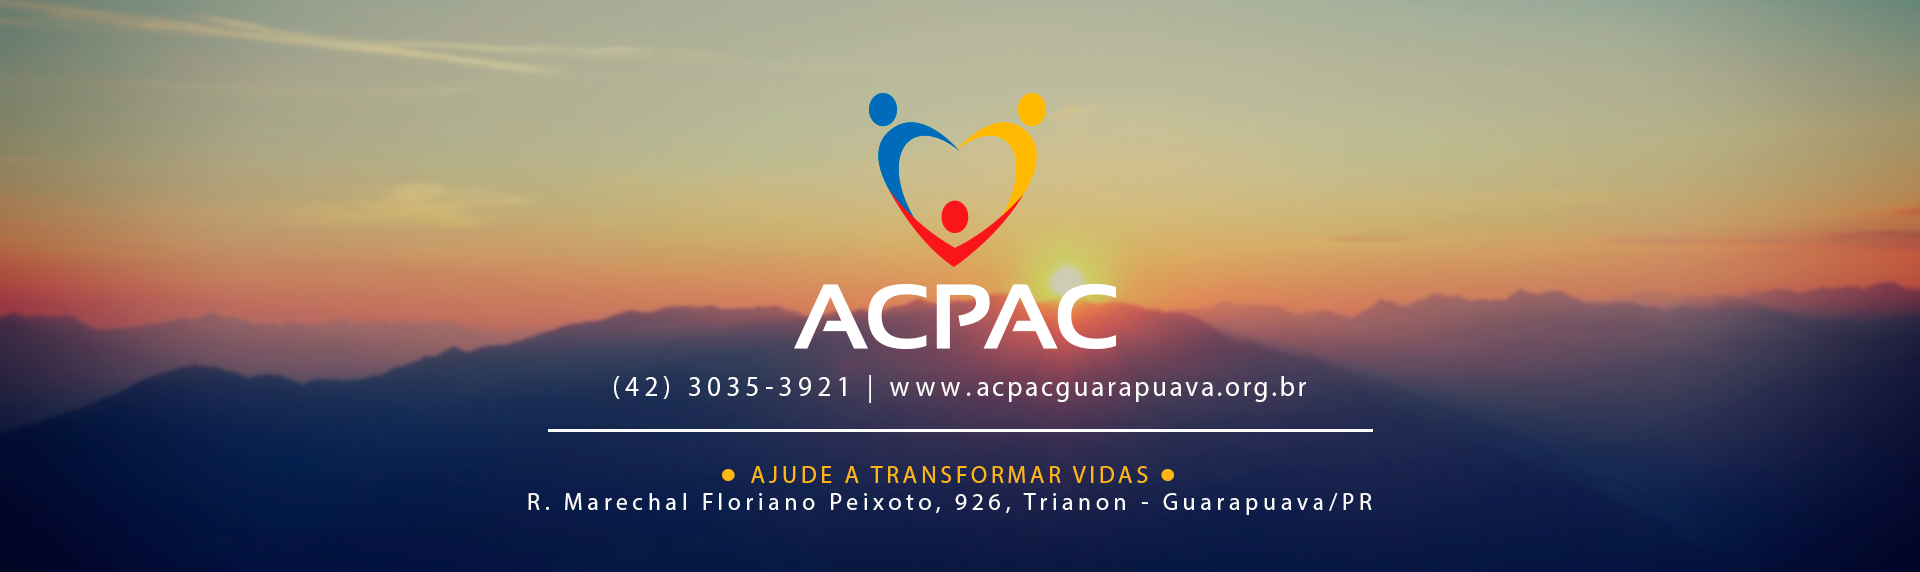 acpac-banner.png